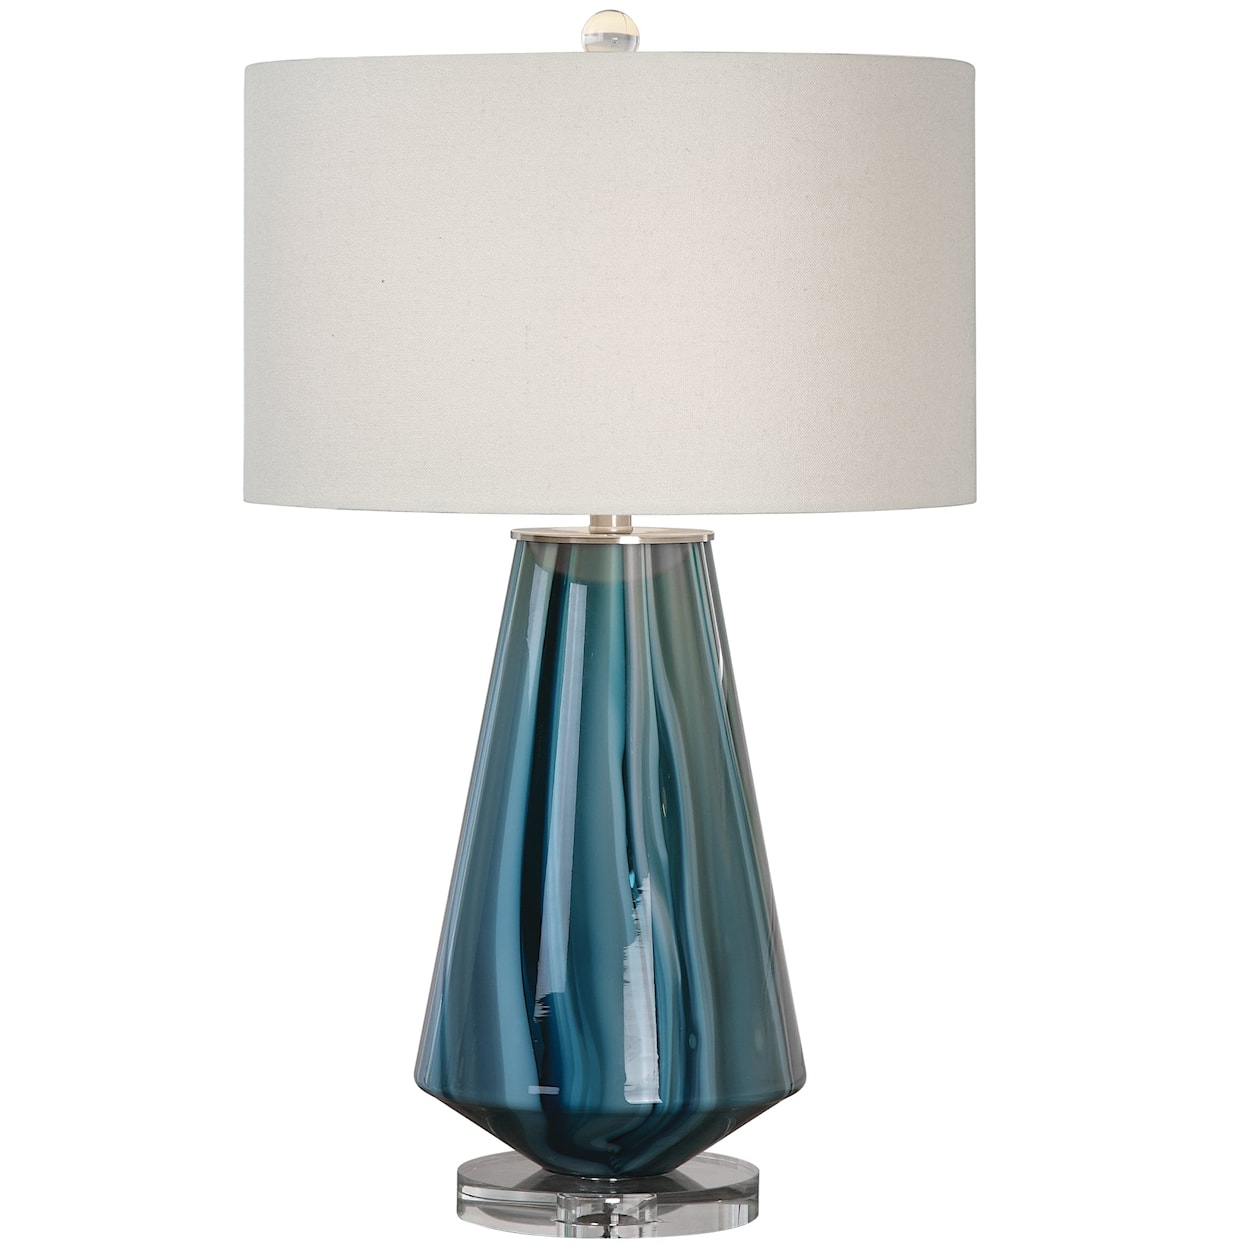 Uttermost Table Lamps Pescara Table Lamp